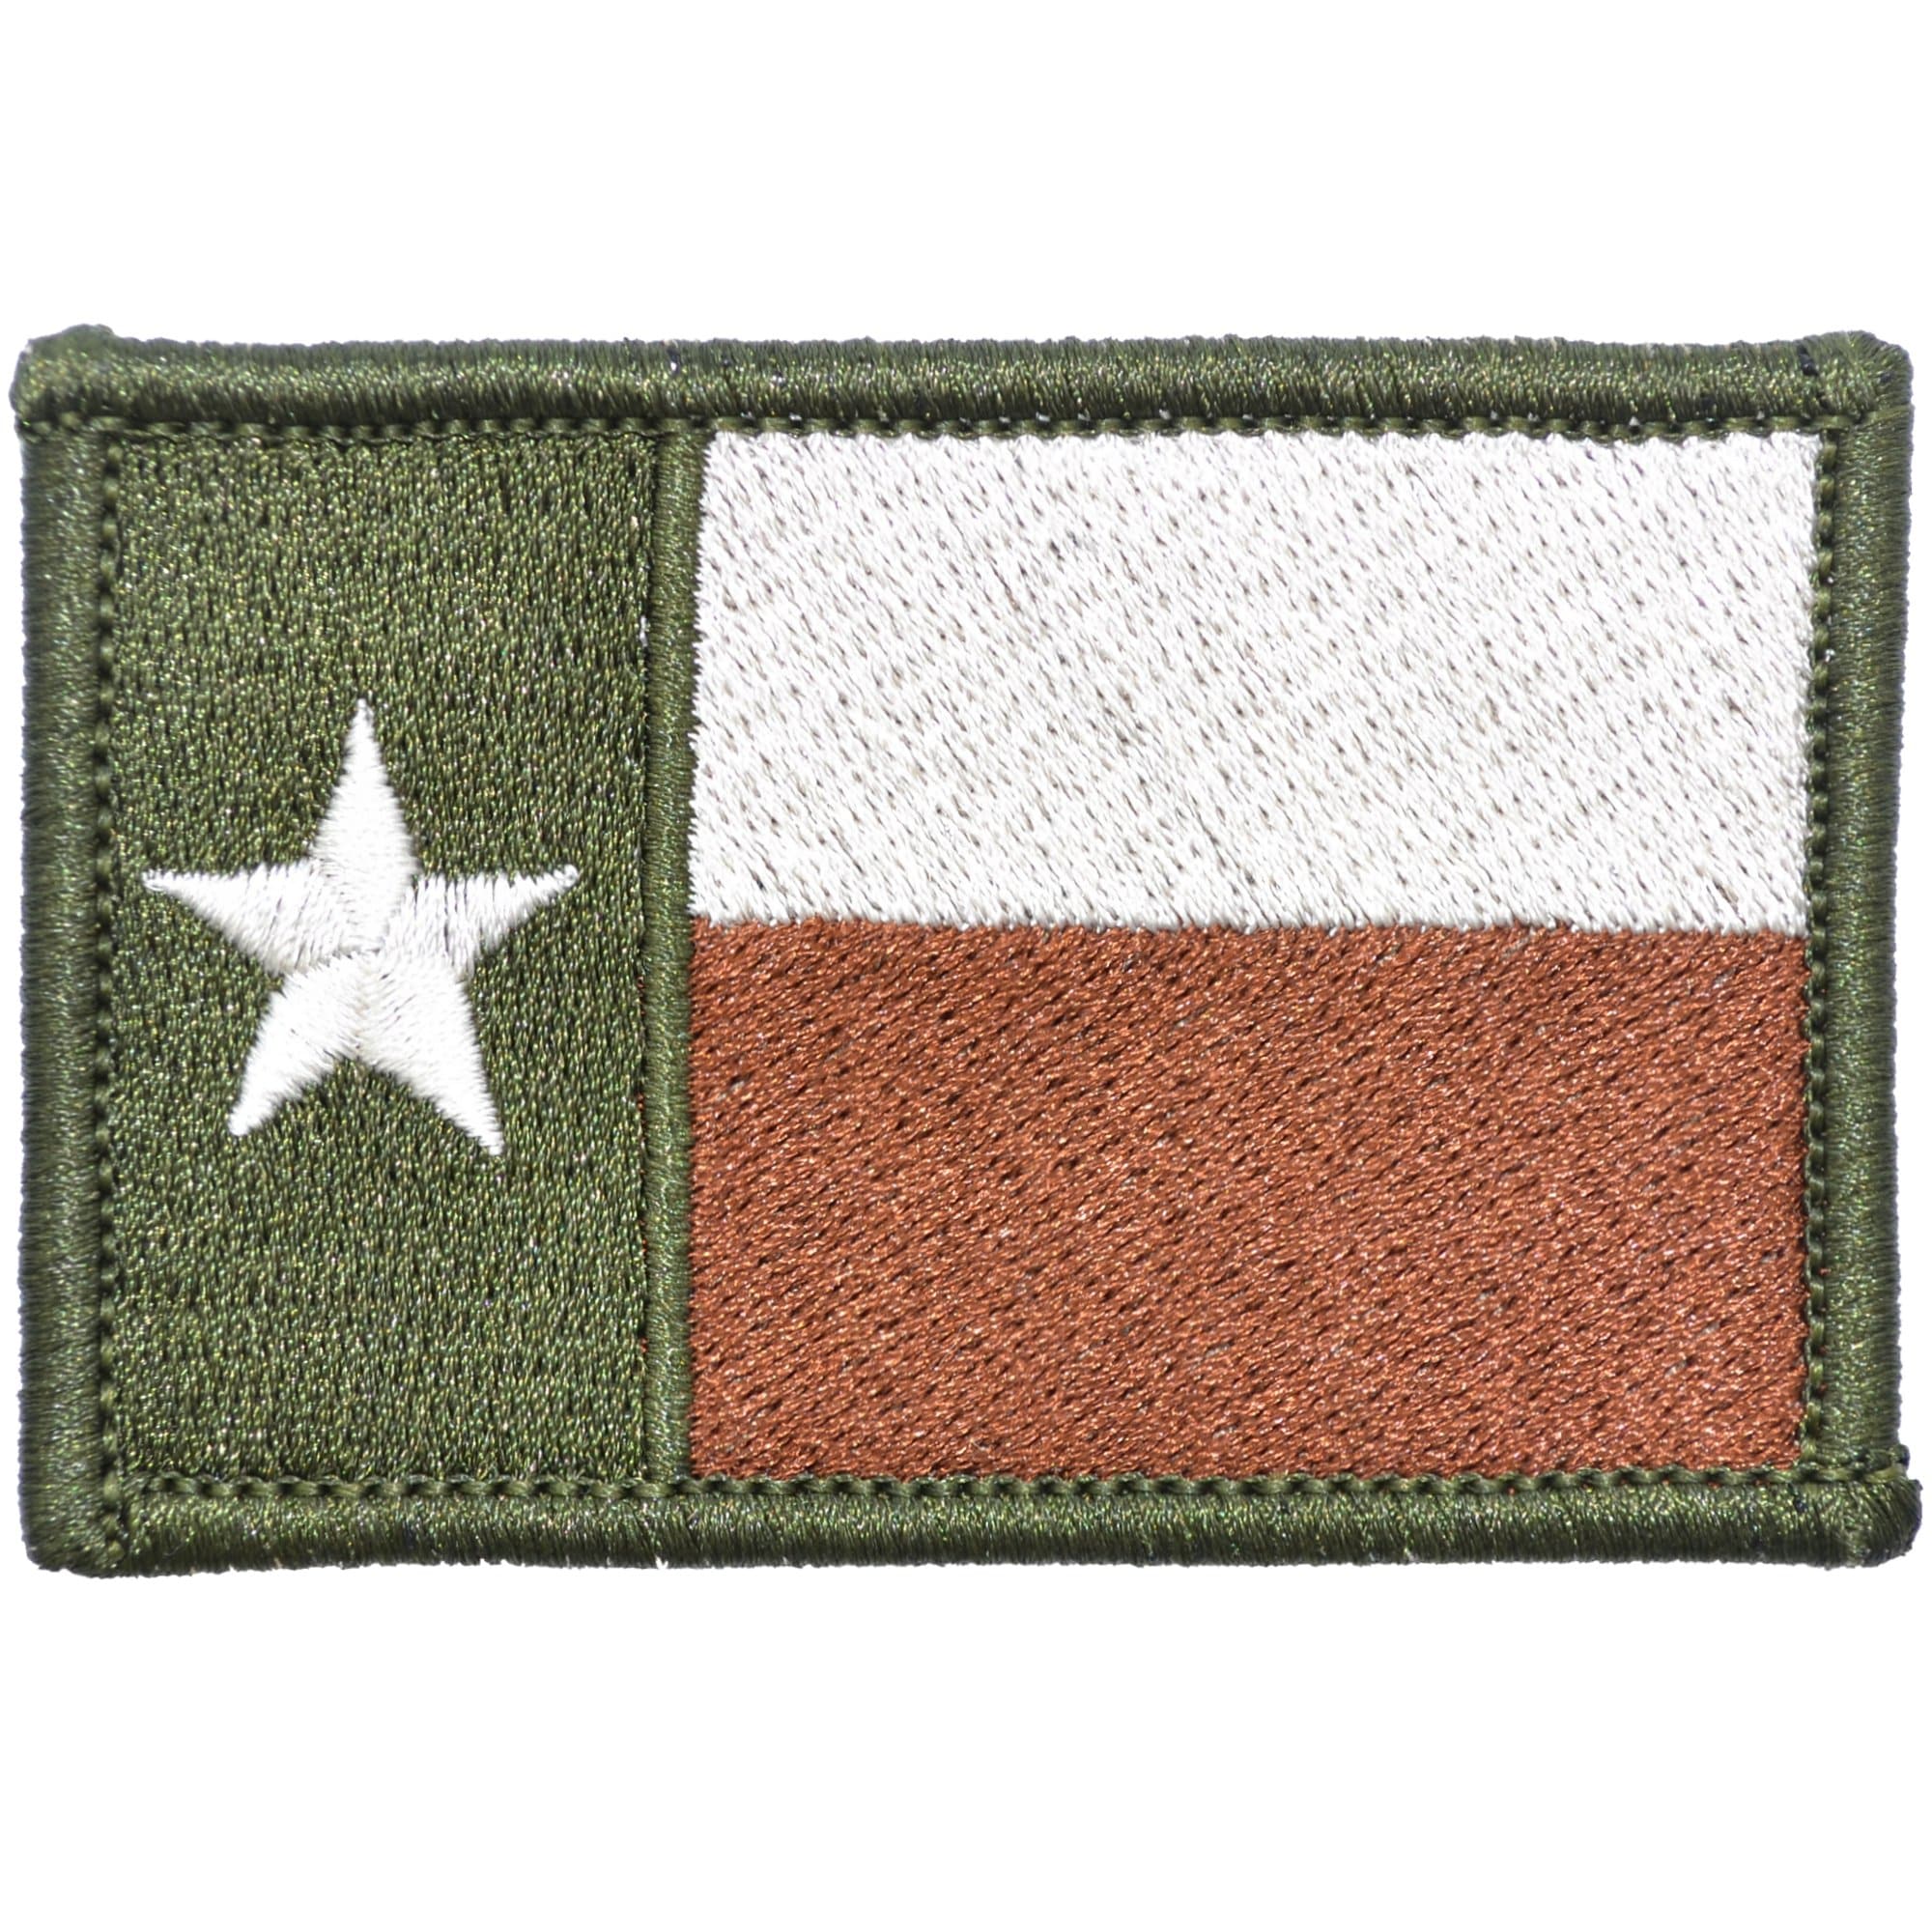 Tactical Gear Junkie Patches MultiCam Texas State Flag - 2x3 Patch